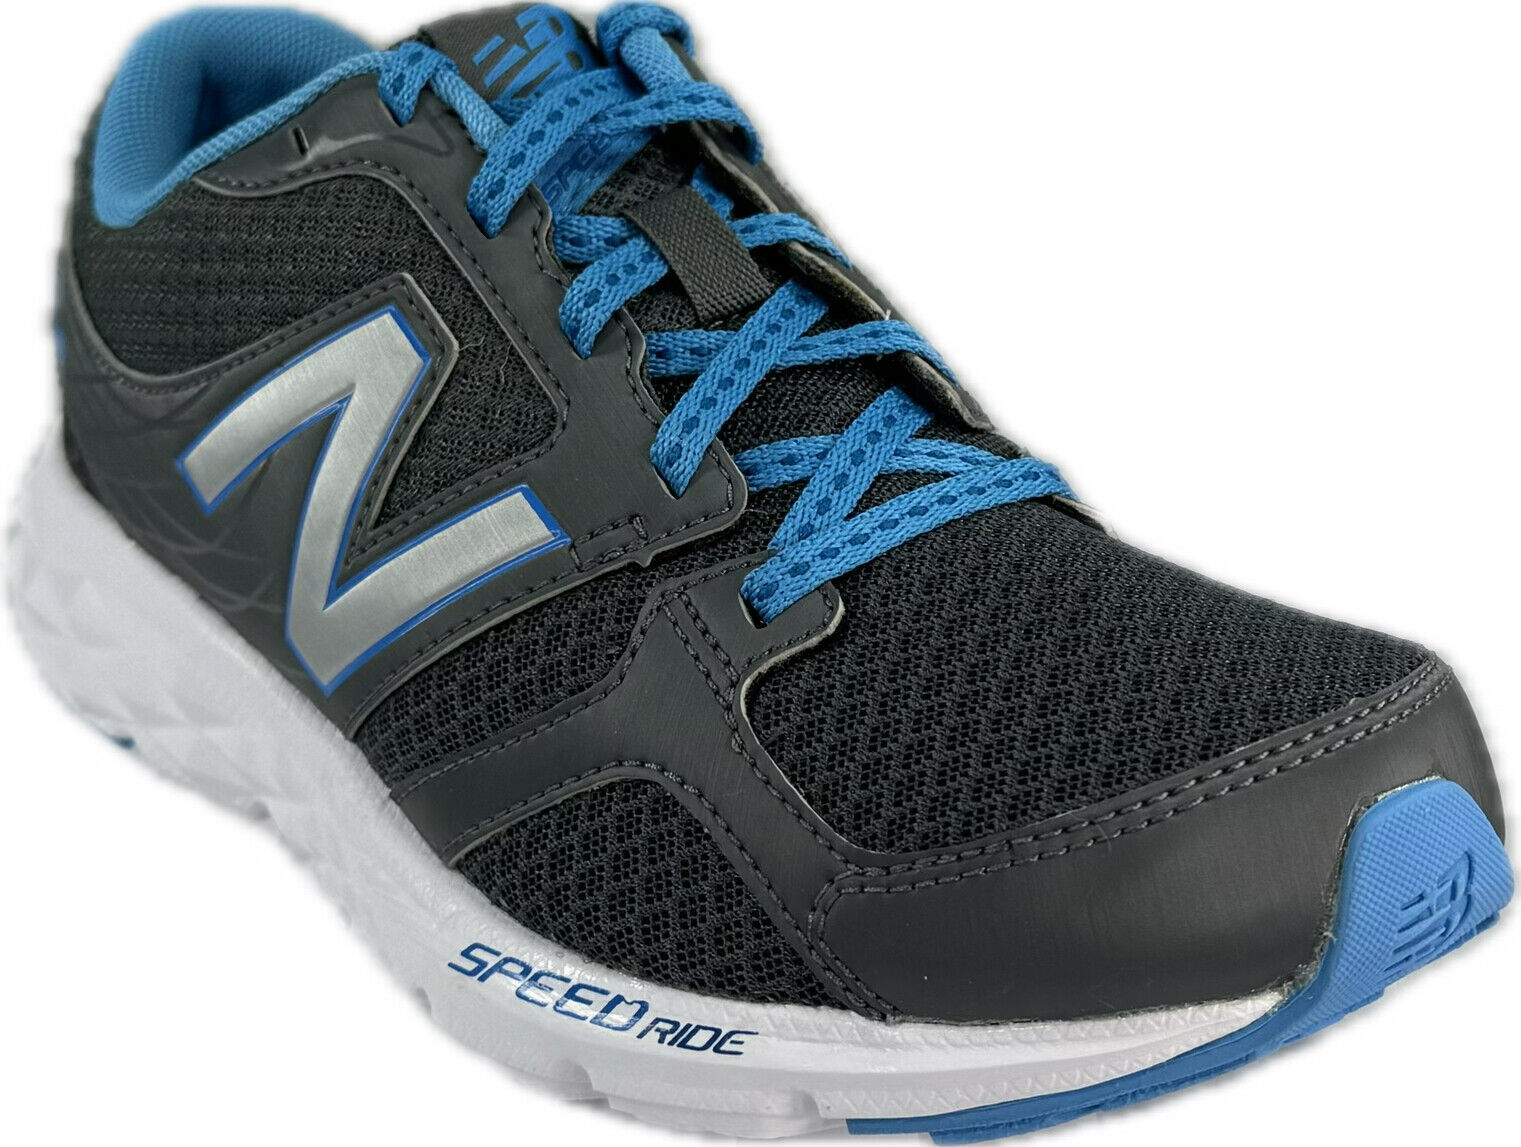 Primary image for NEW BALANCE 490v8 WOMEN'S GRAY/BLUE RUNNING SHOES Sz 6.5, W490LN3